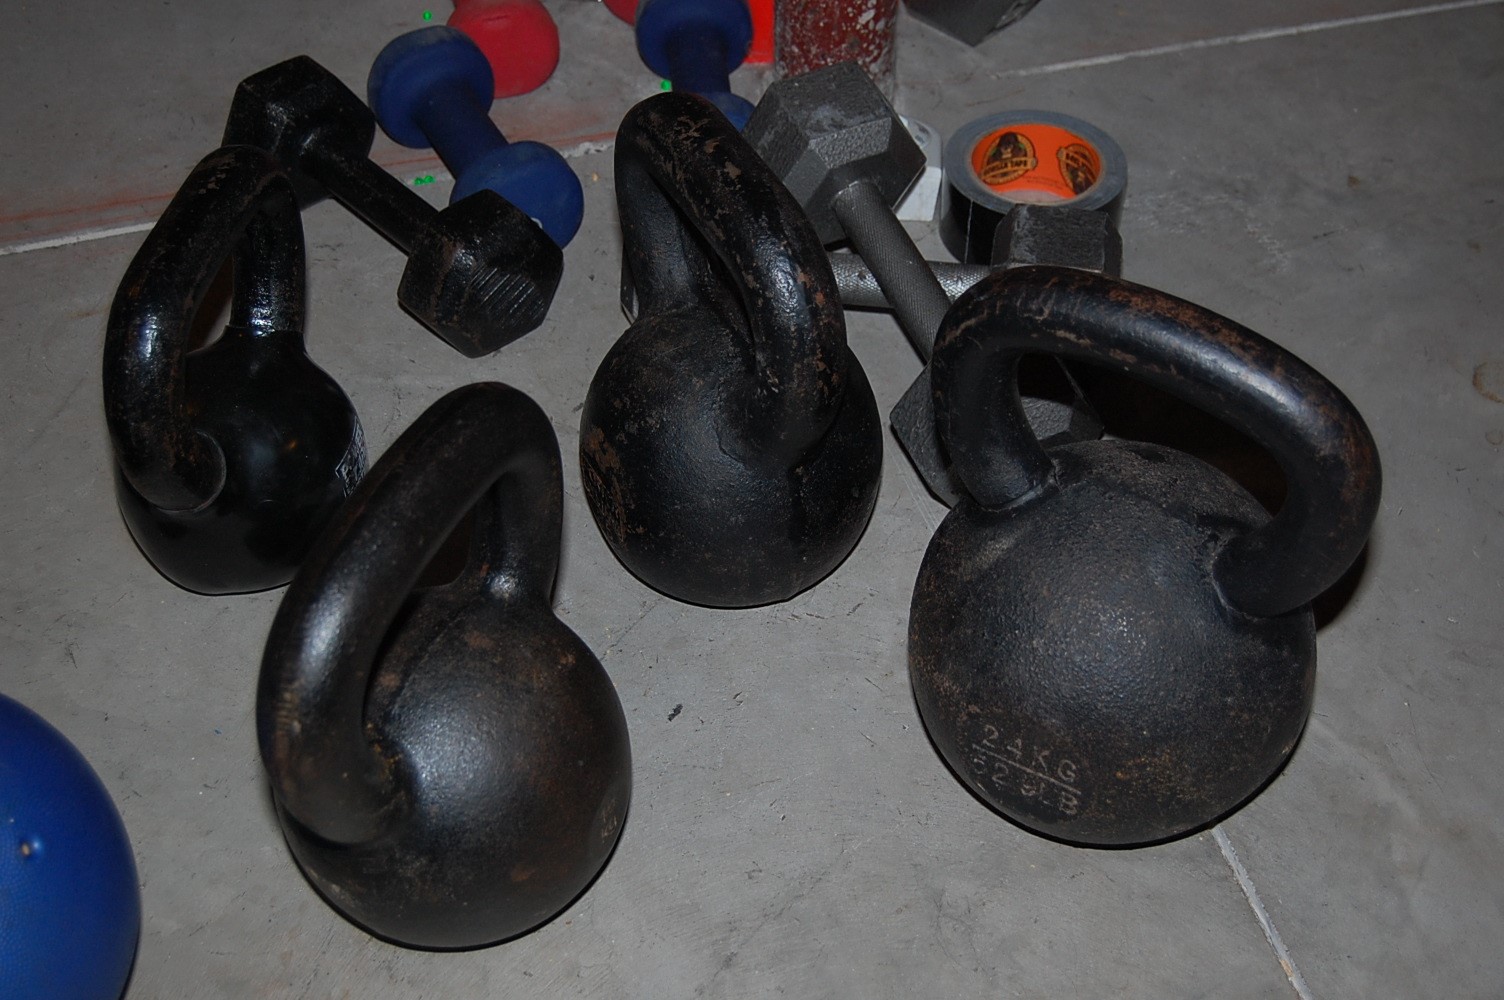 Kettlebells and dumbbells are portable, economical and functional pieces of fitness equipment.